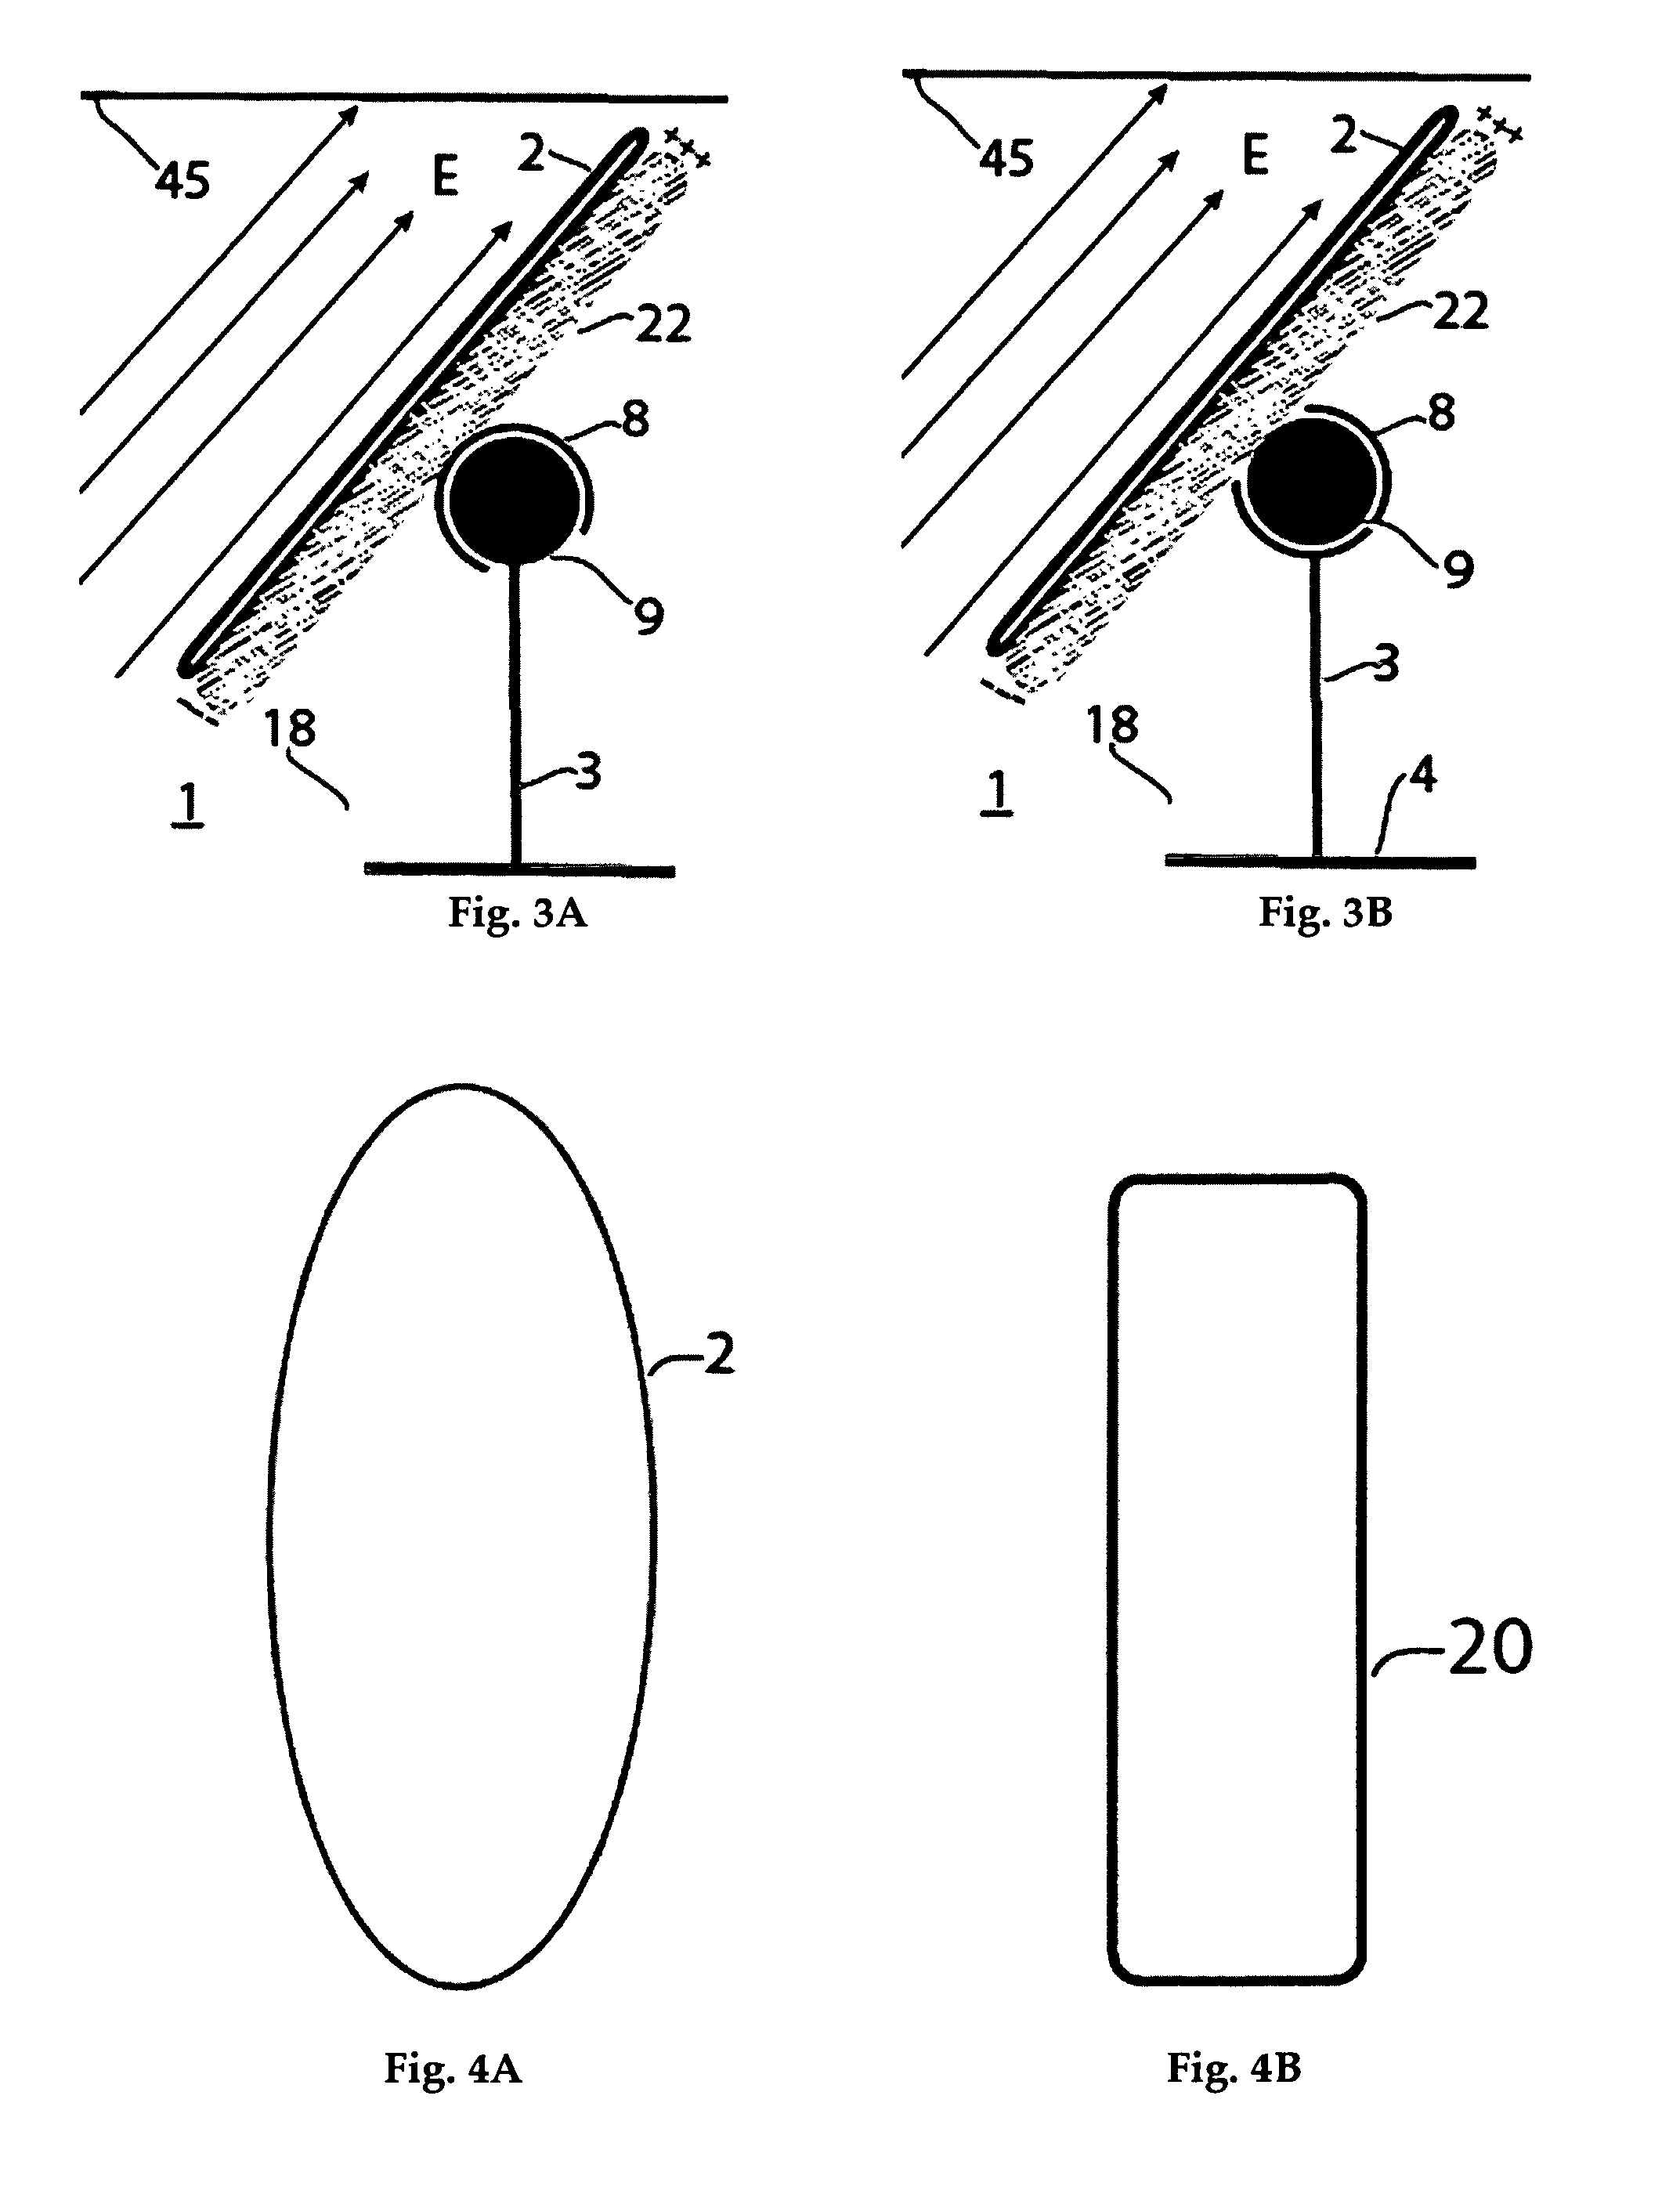 Fresnel solar concentrator array with centered universal pivots